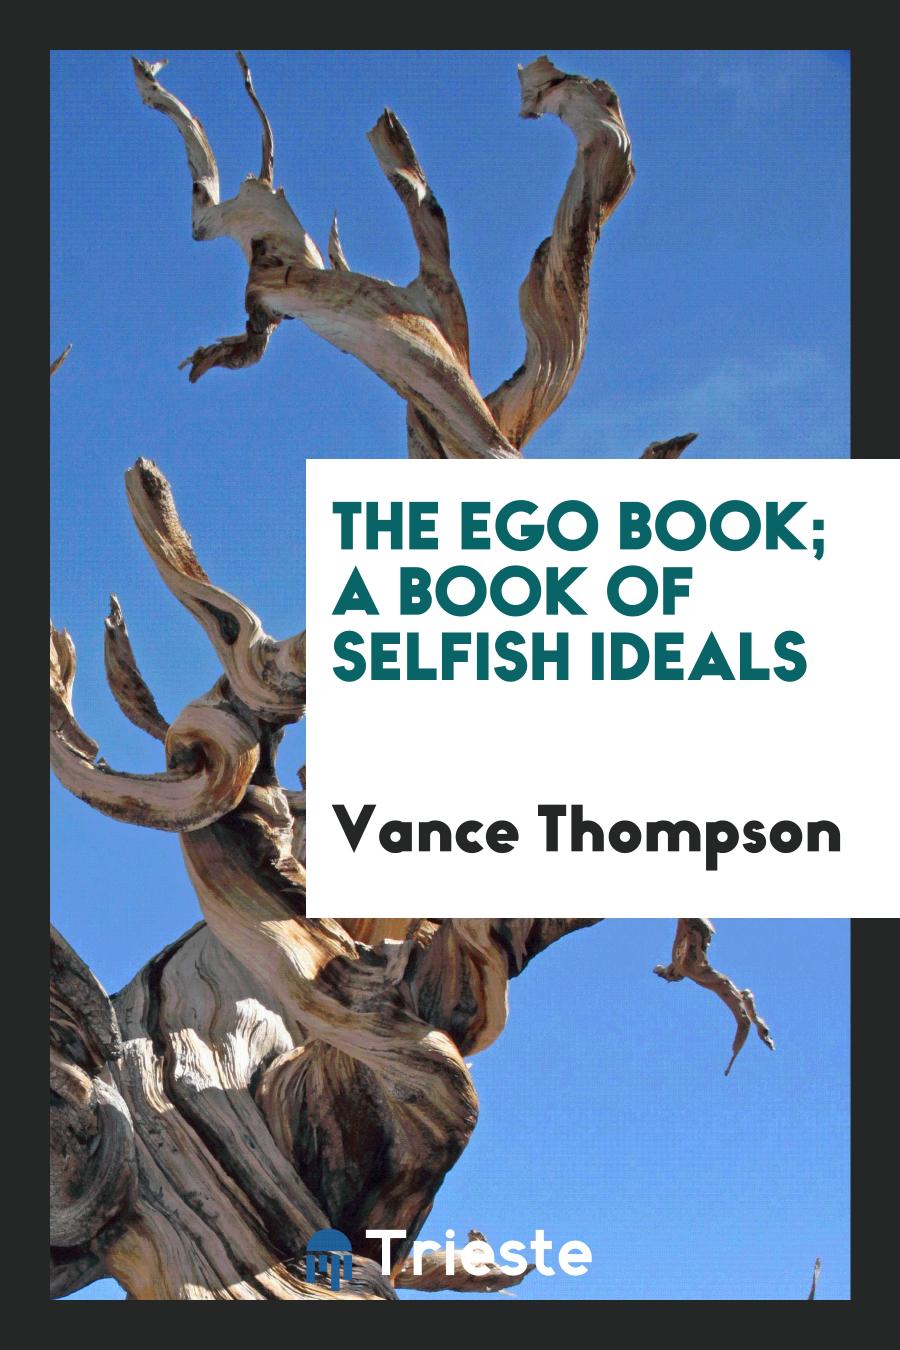 The ego book; a book of selfish ideals